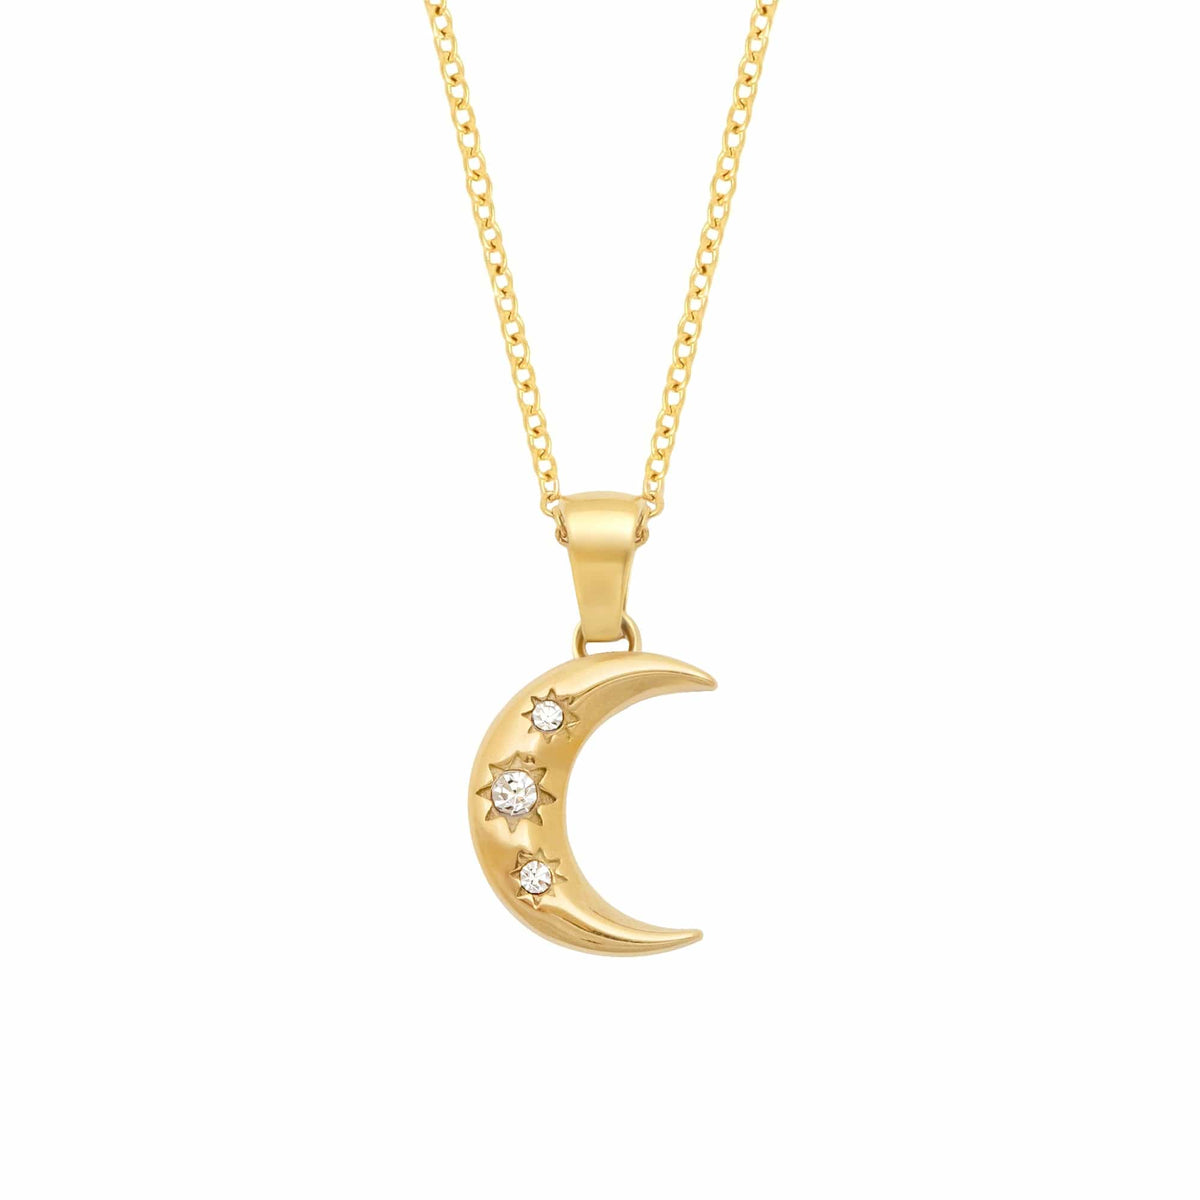 BohoMoon Stainless Steel Half Moon Necklace Gold